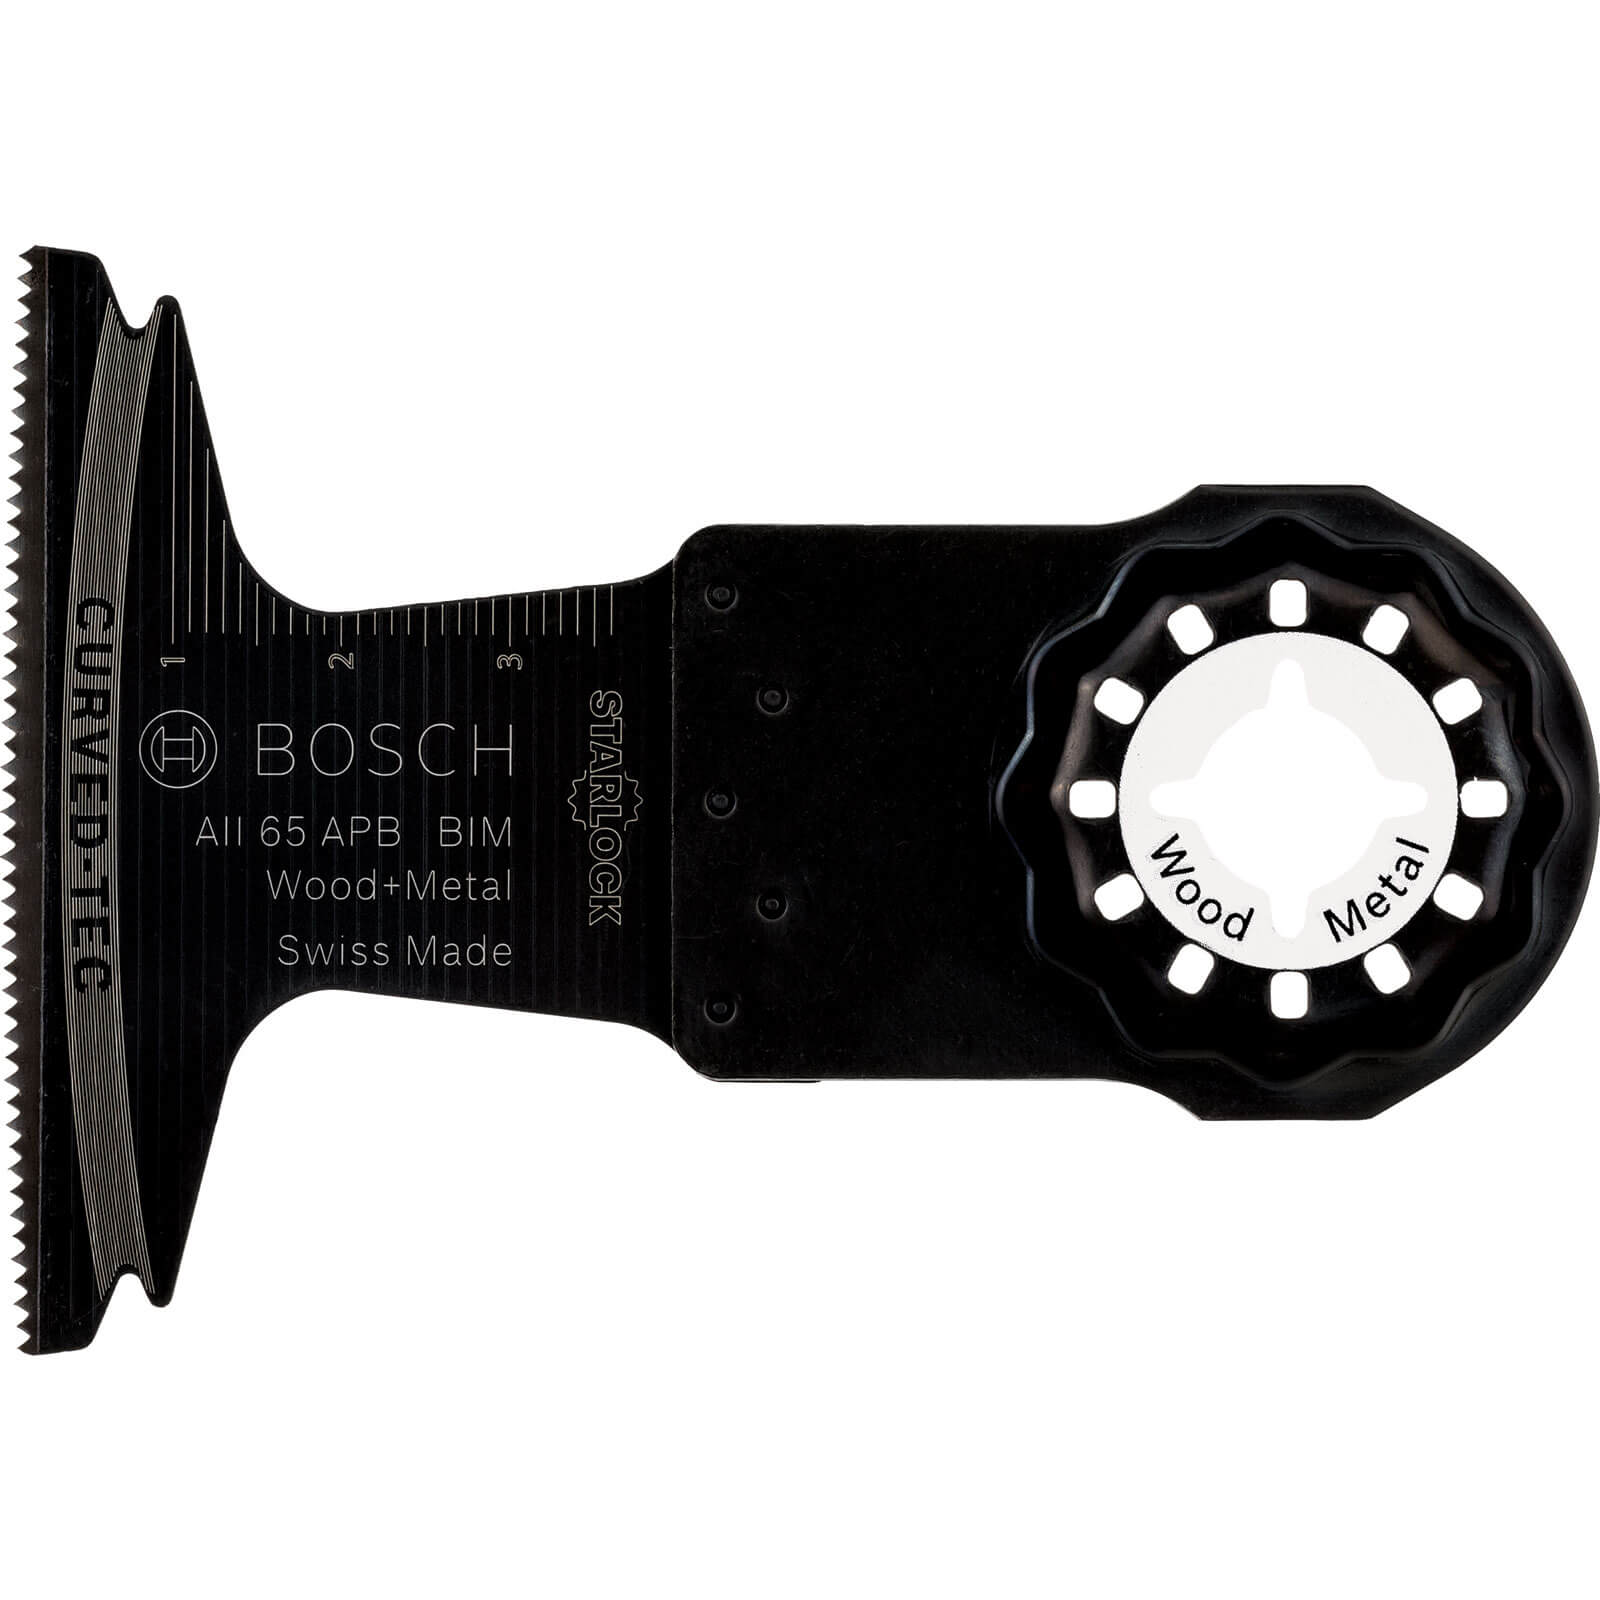 Image of Bosch All 65 APB Metal and Wood Oscillating Multi Tool Plunge Saw Blade 65mm Pack of 1